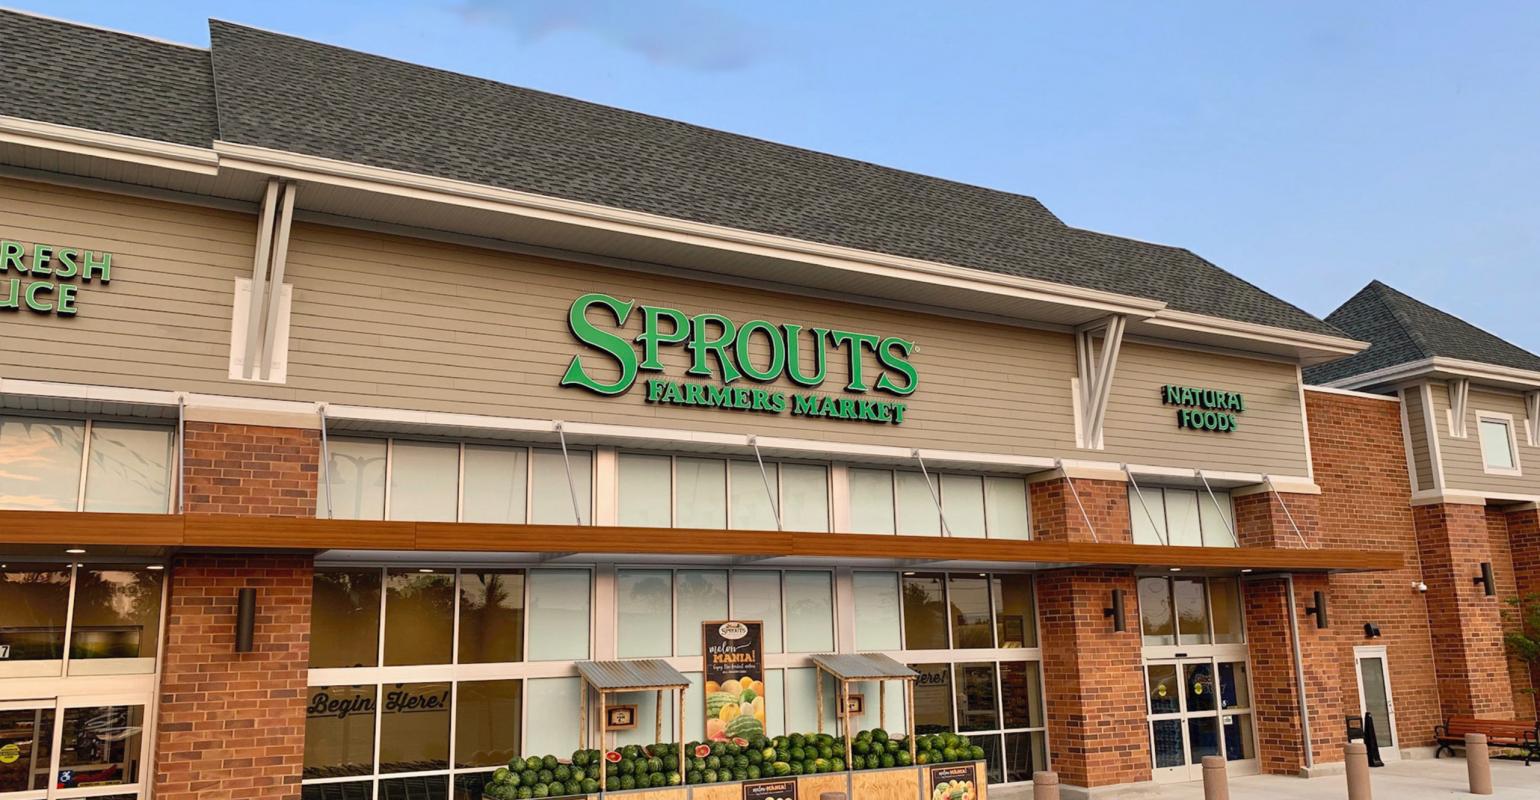 Sprouts Farmers Market offers new products for summertime gatherings